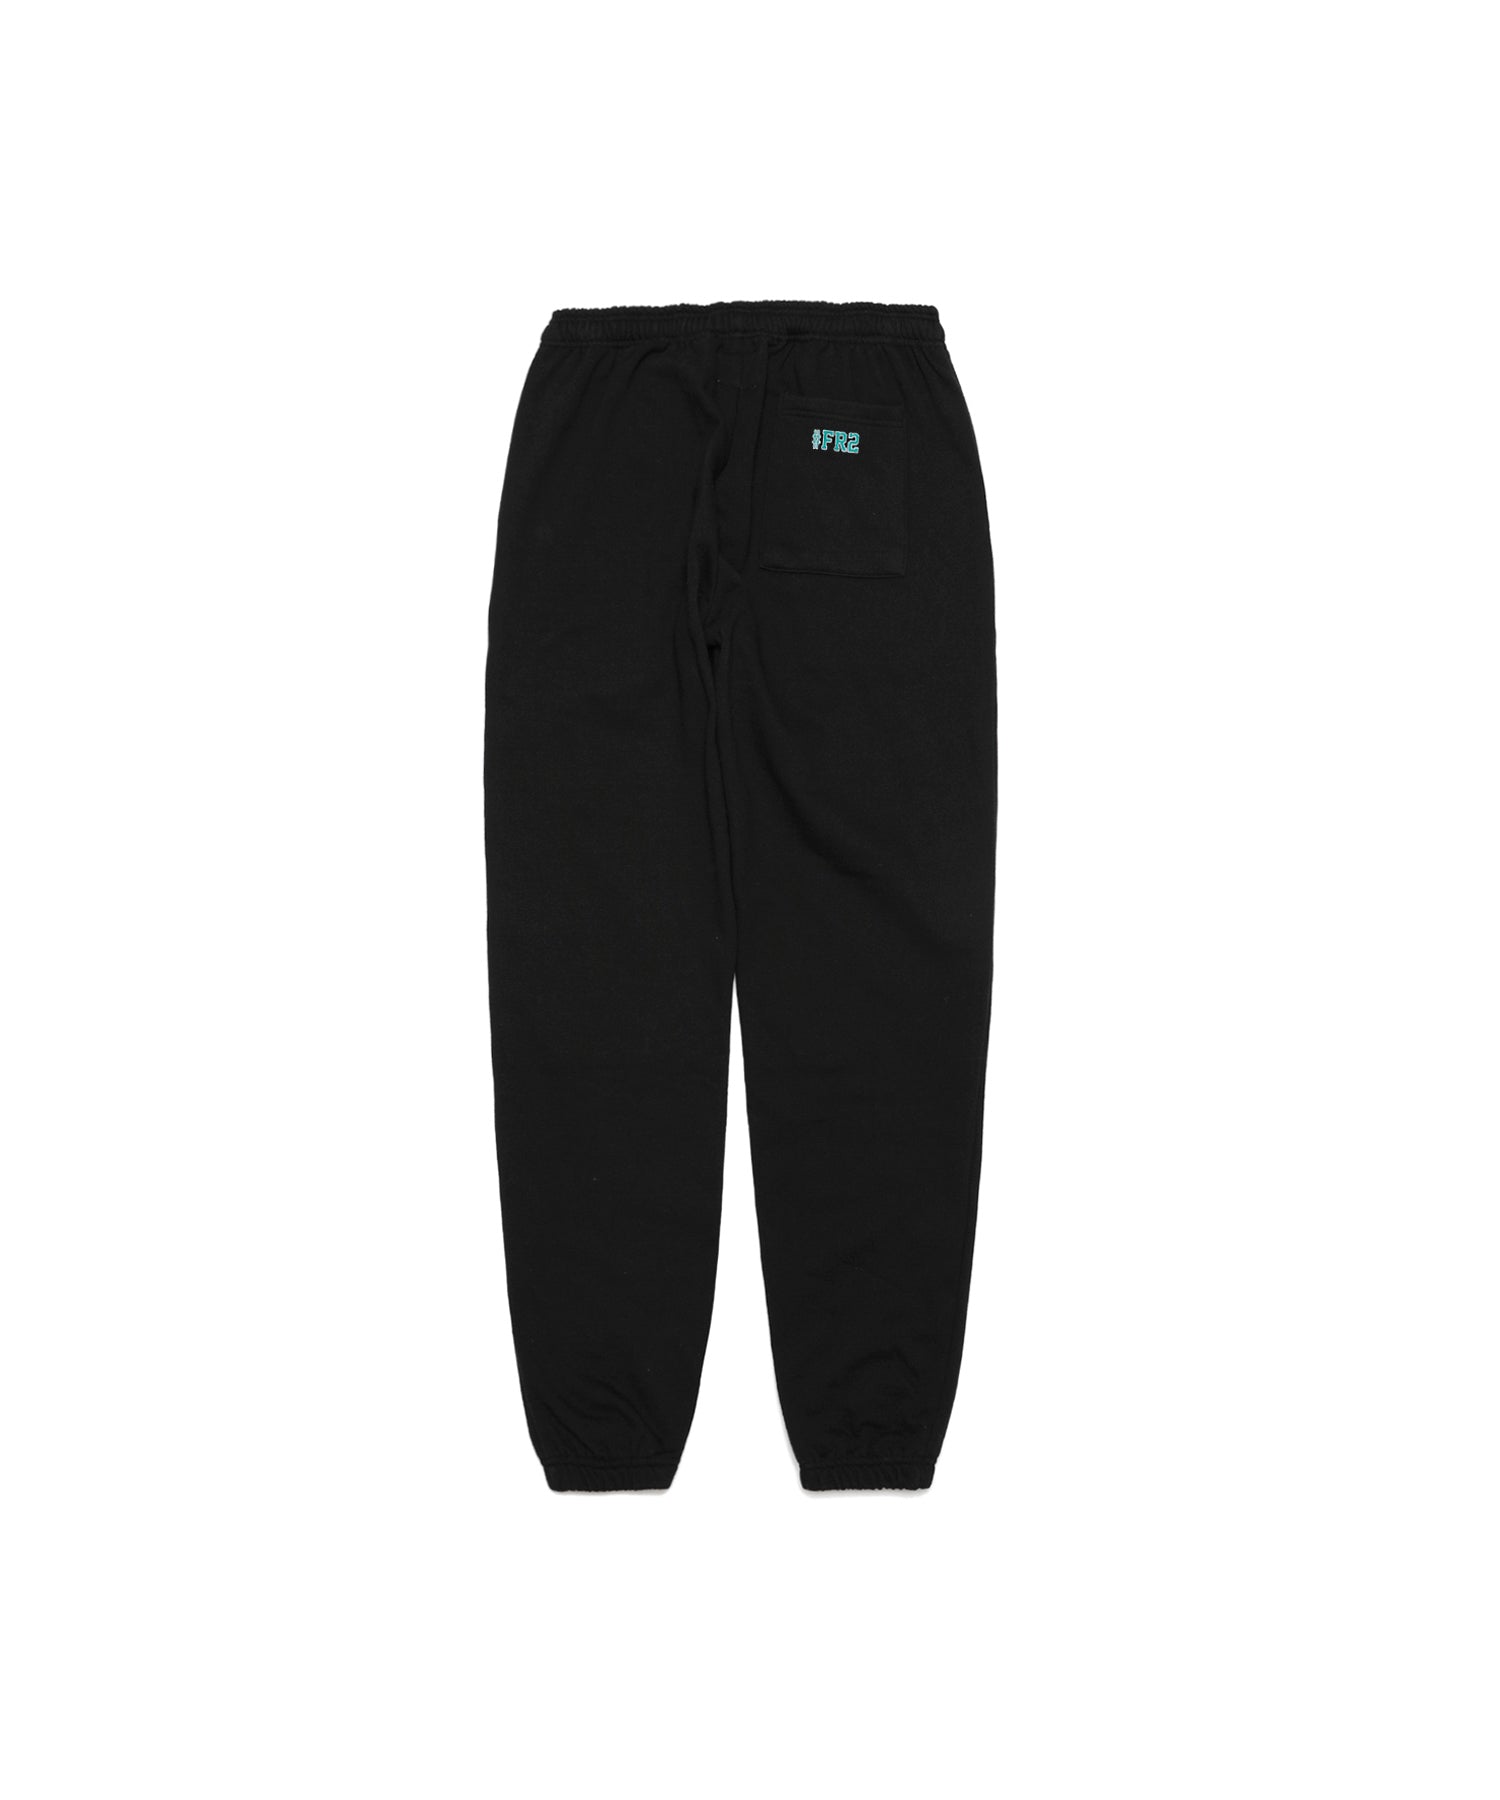 Flame Resistant Sweatpants – Just In Trend